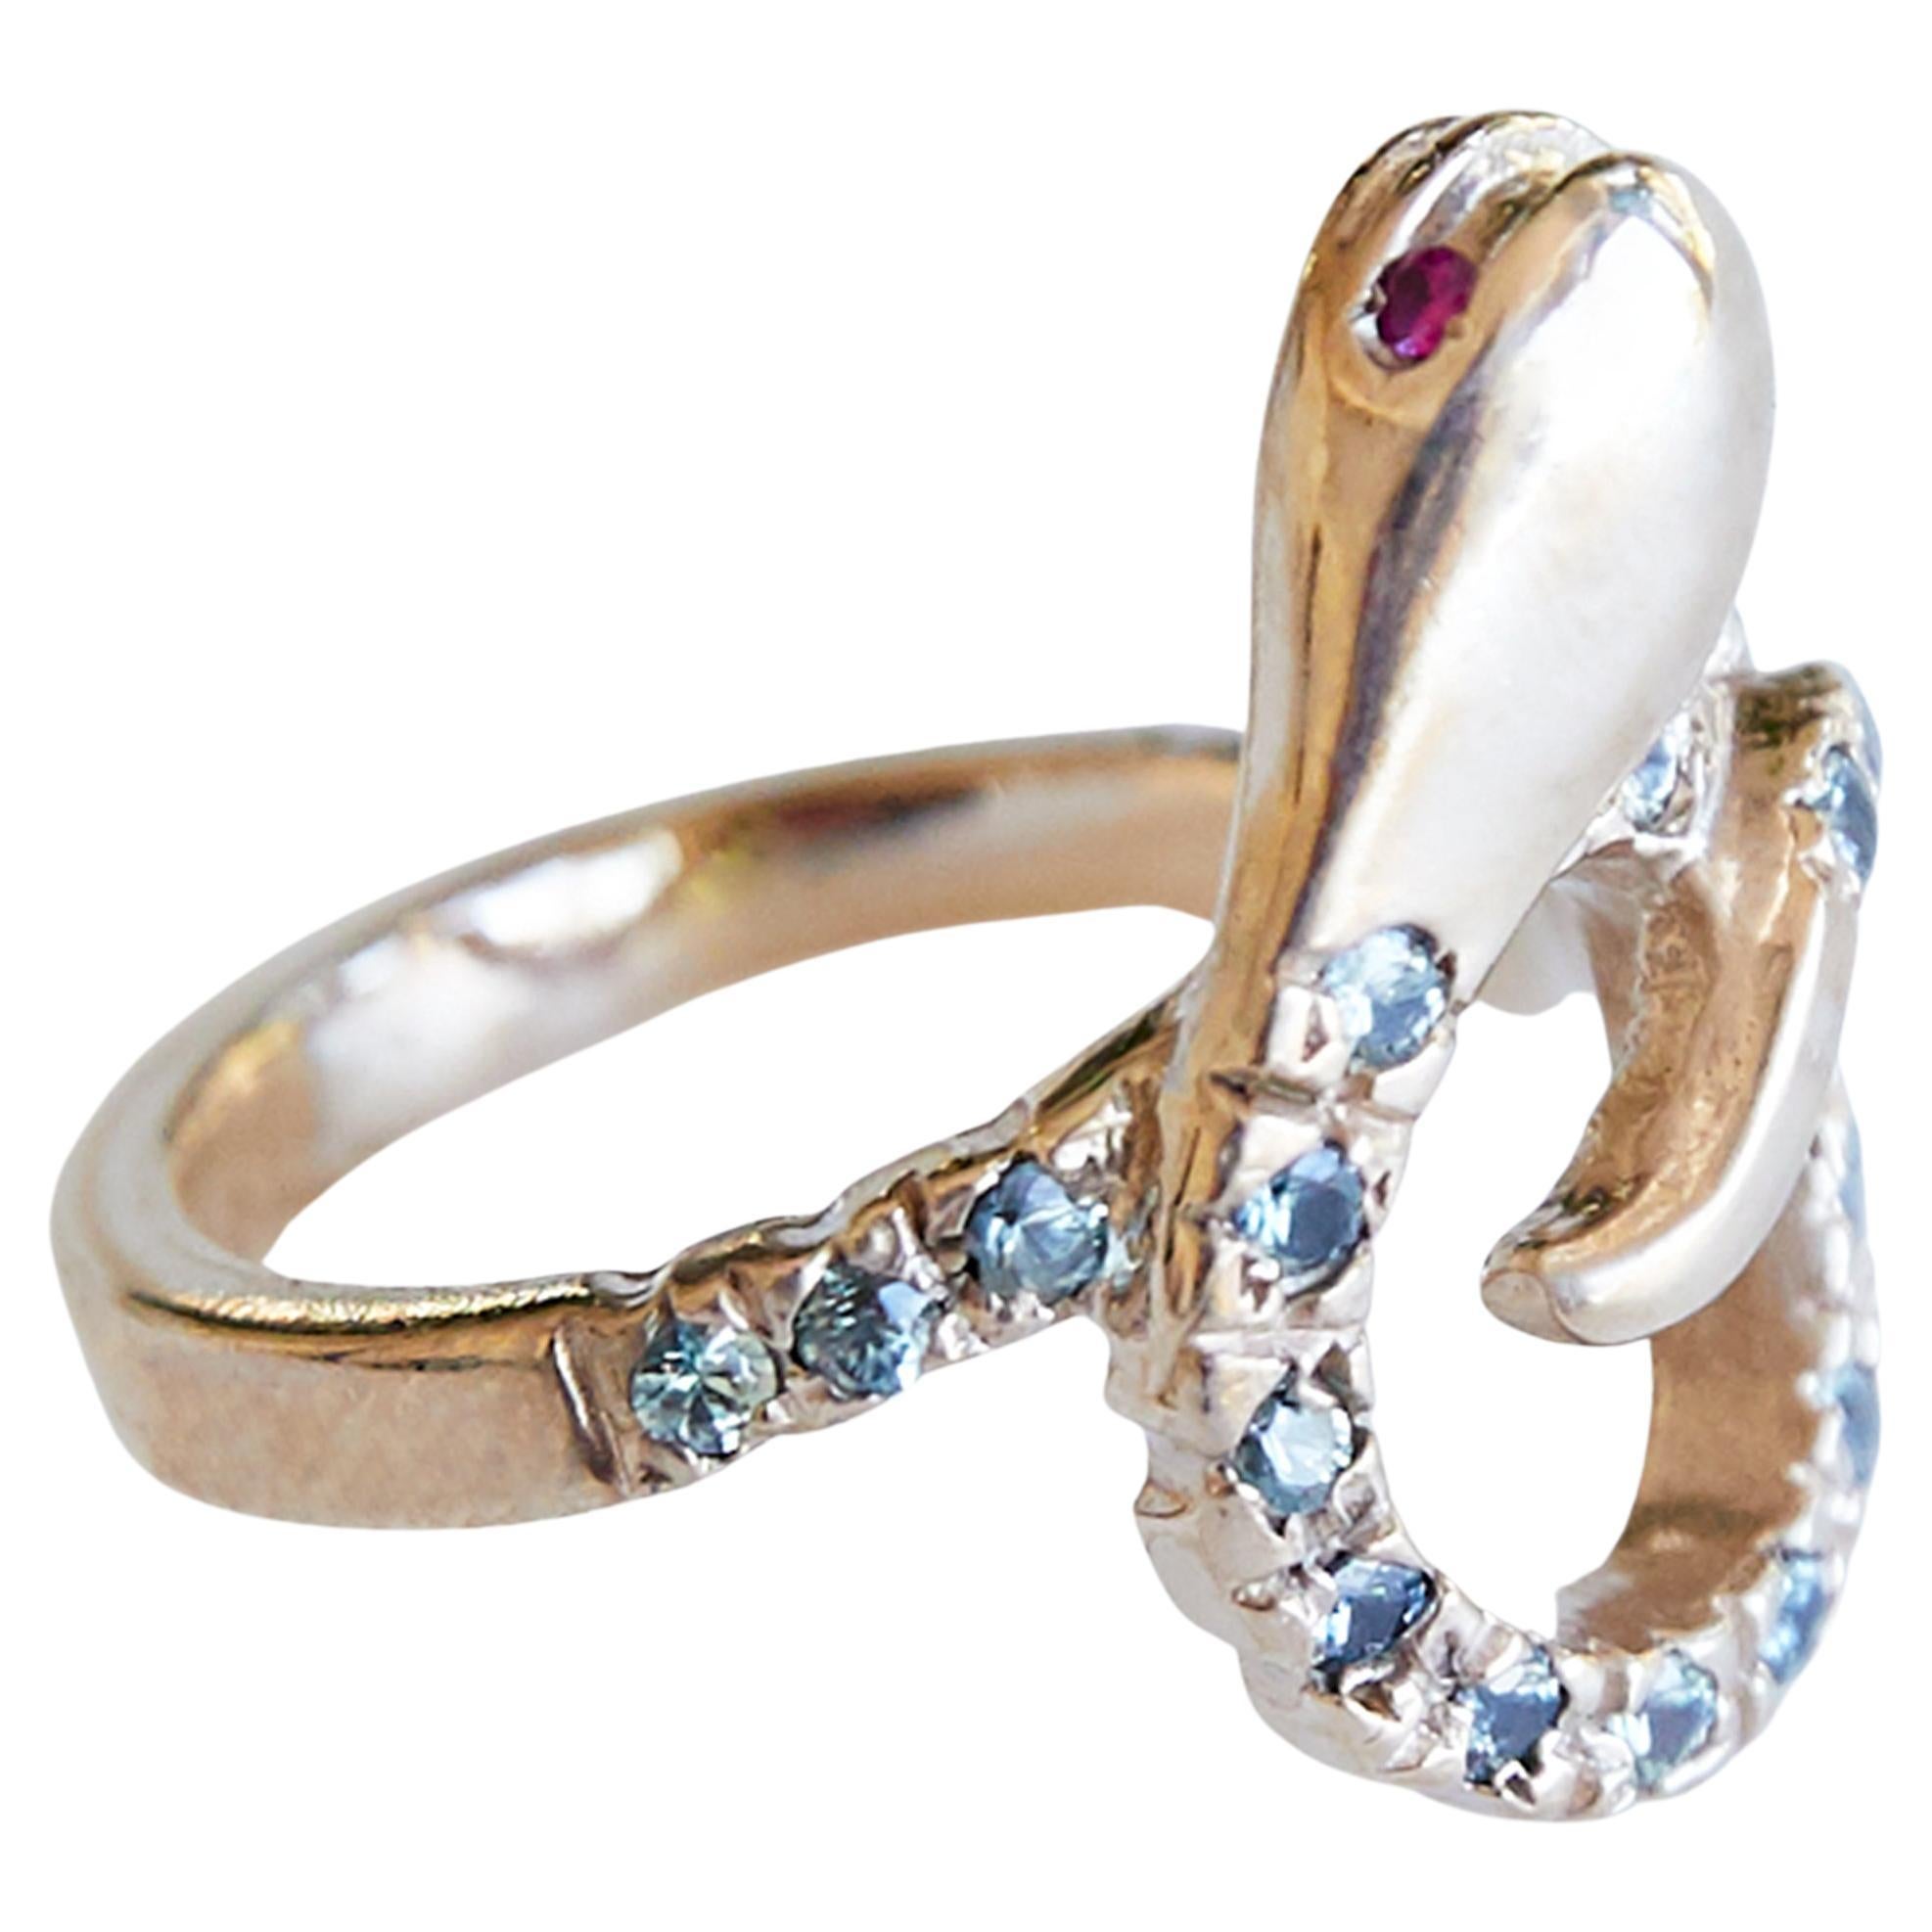 Gold Snake Ring Cocktail Ring Sapphire Ruby Animal jewelry J Dauphin